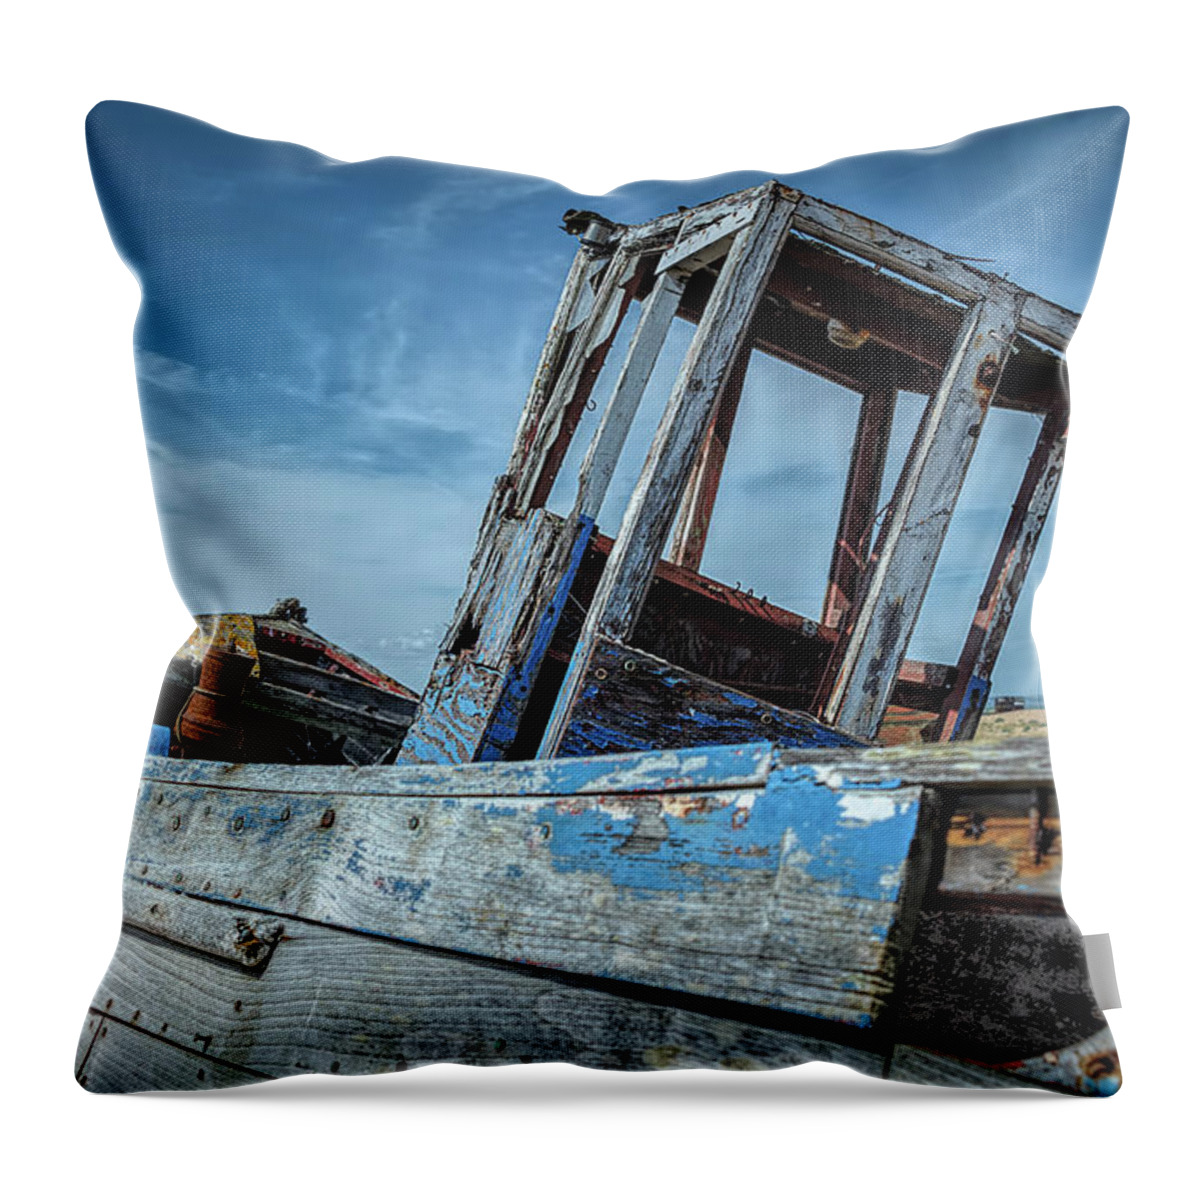 Dungeness Throw Pillow featuring the photograph Old Abandoned Boat by Rick Deacon